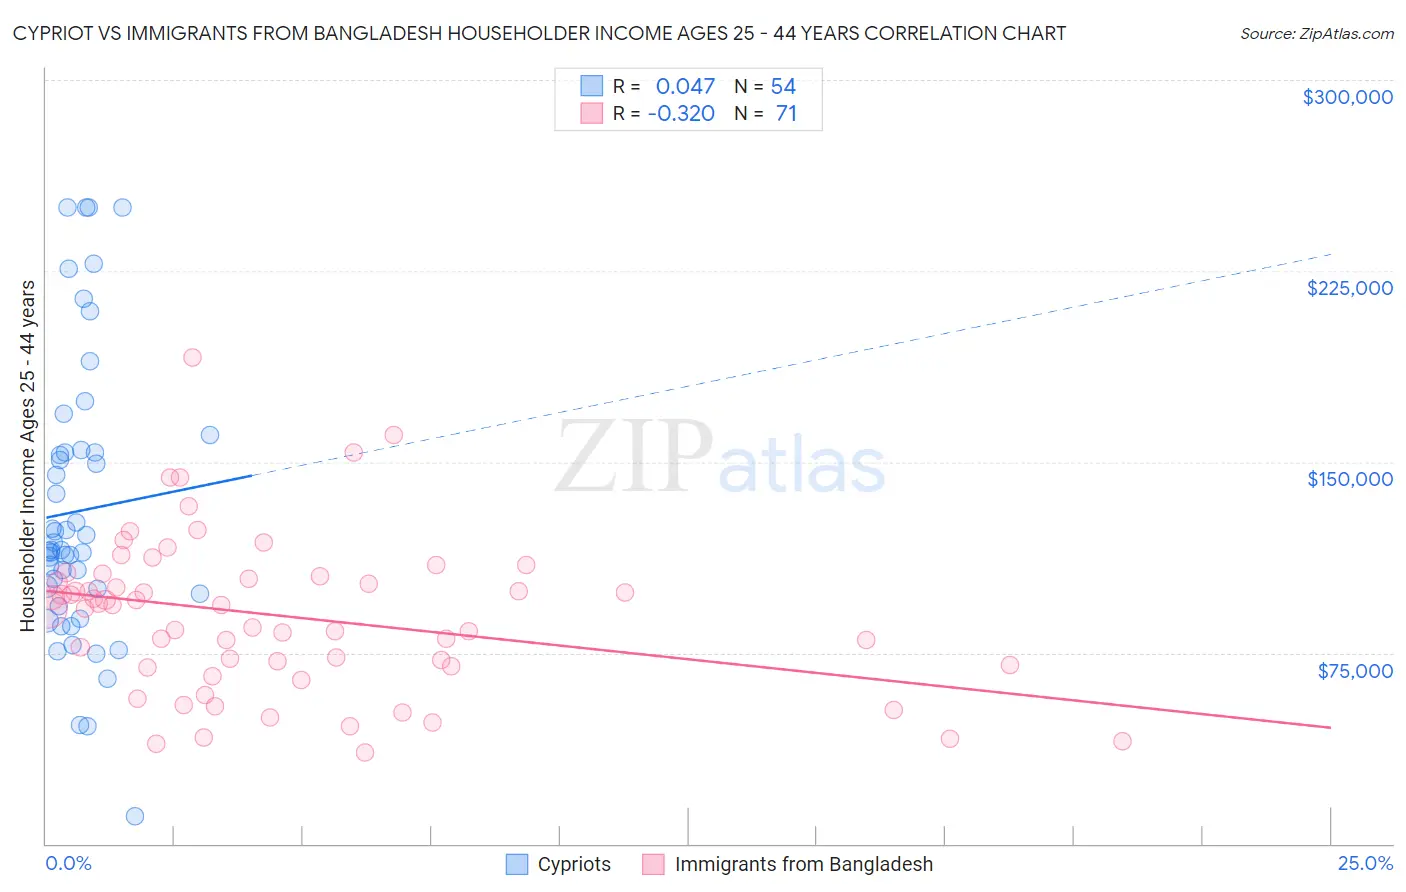 Cypriot vs Immigrants from Bangladesh Householder Income Ages 25 - 44 years